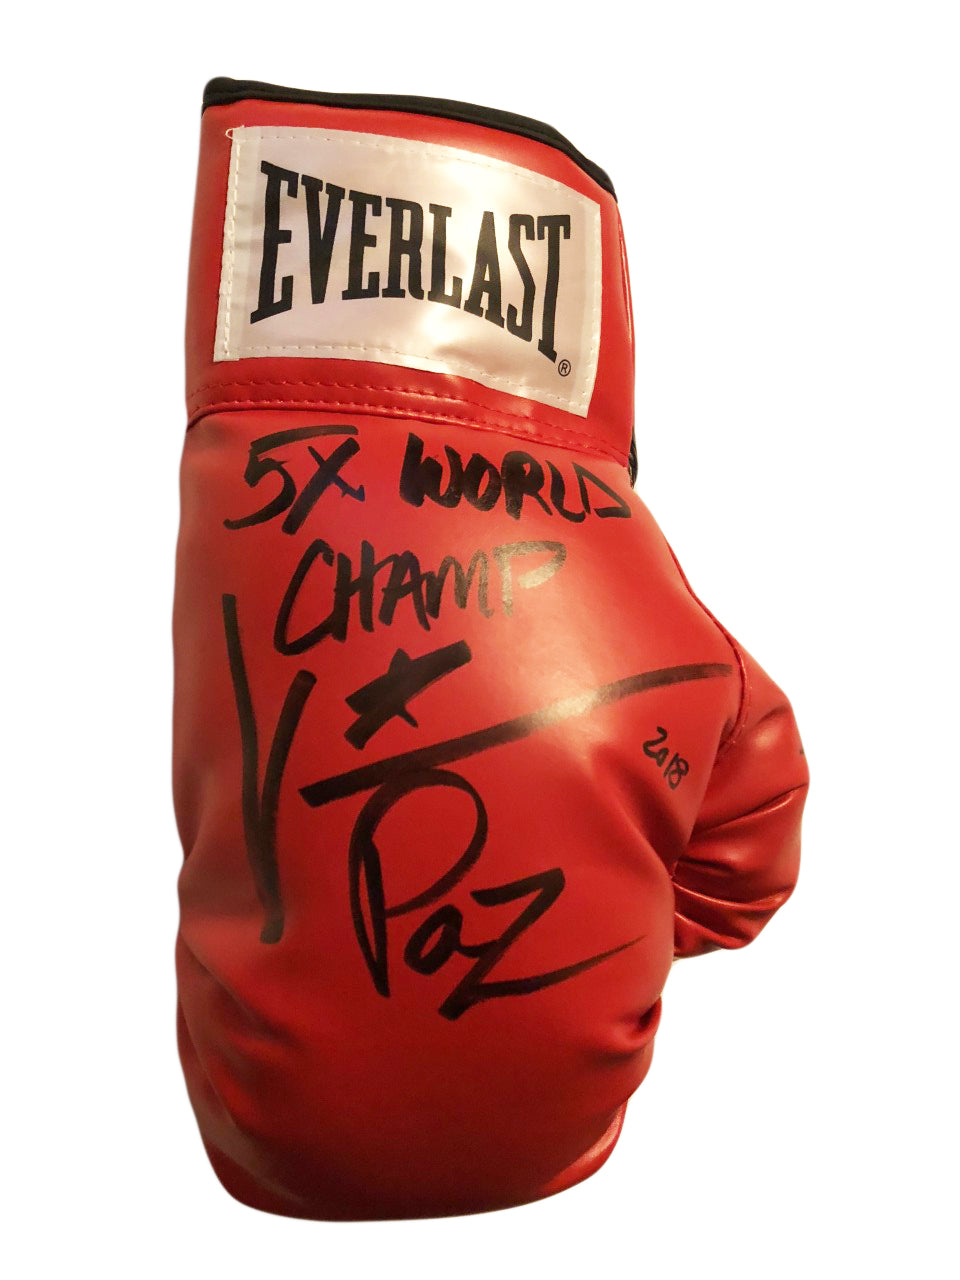 Vinny Paz Pazienza Signed Autographed Boxing Glove 5X World Champ 2018